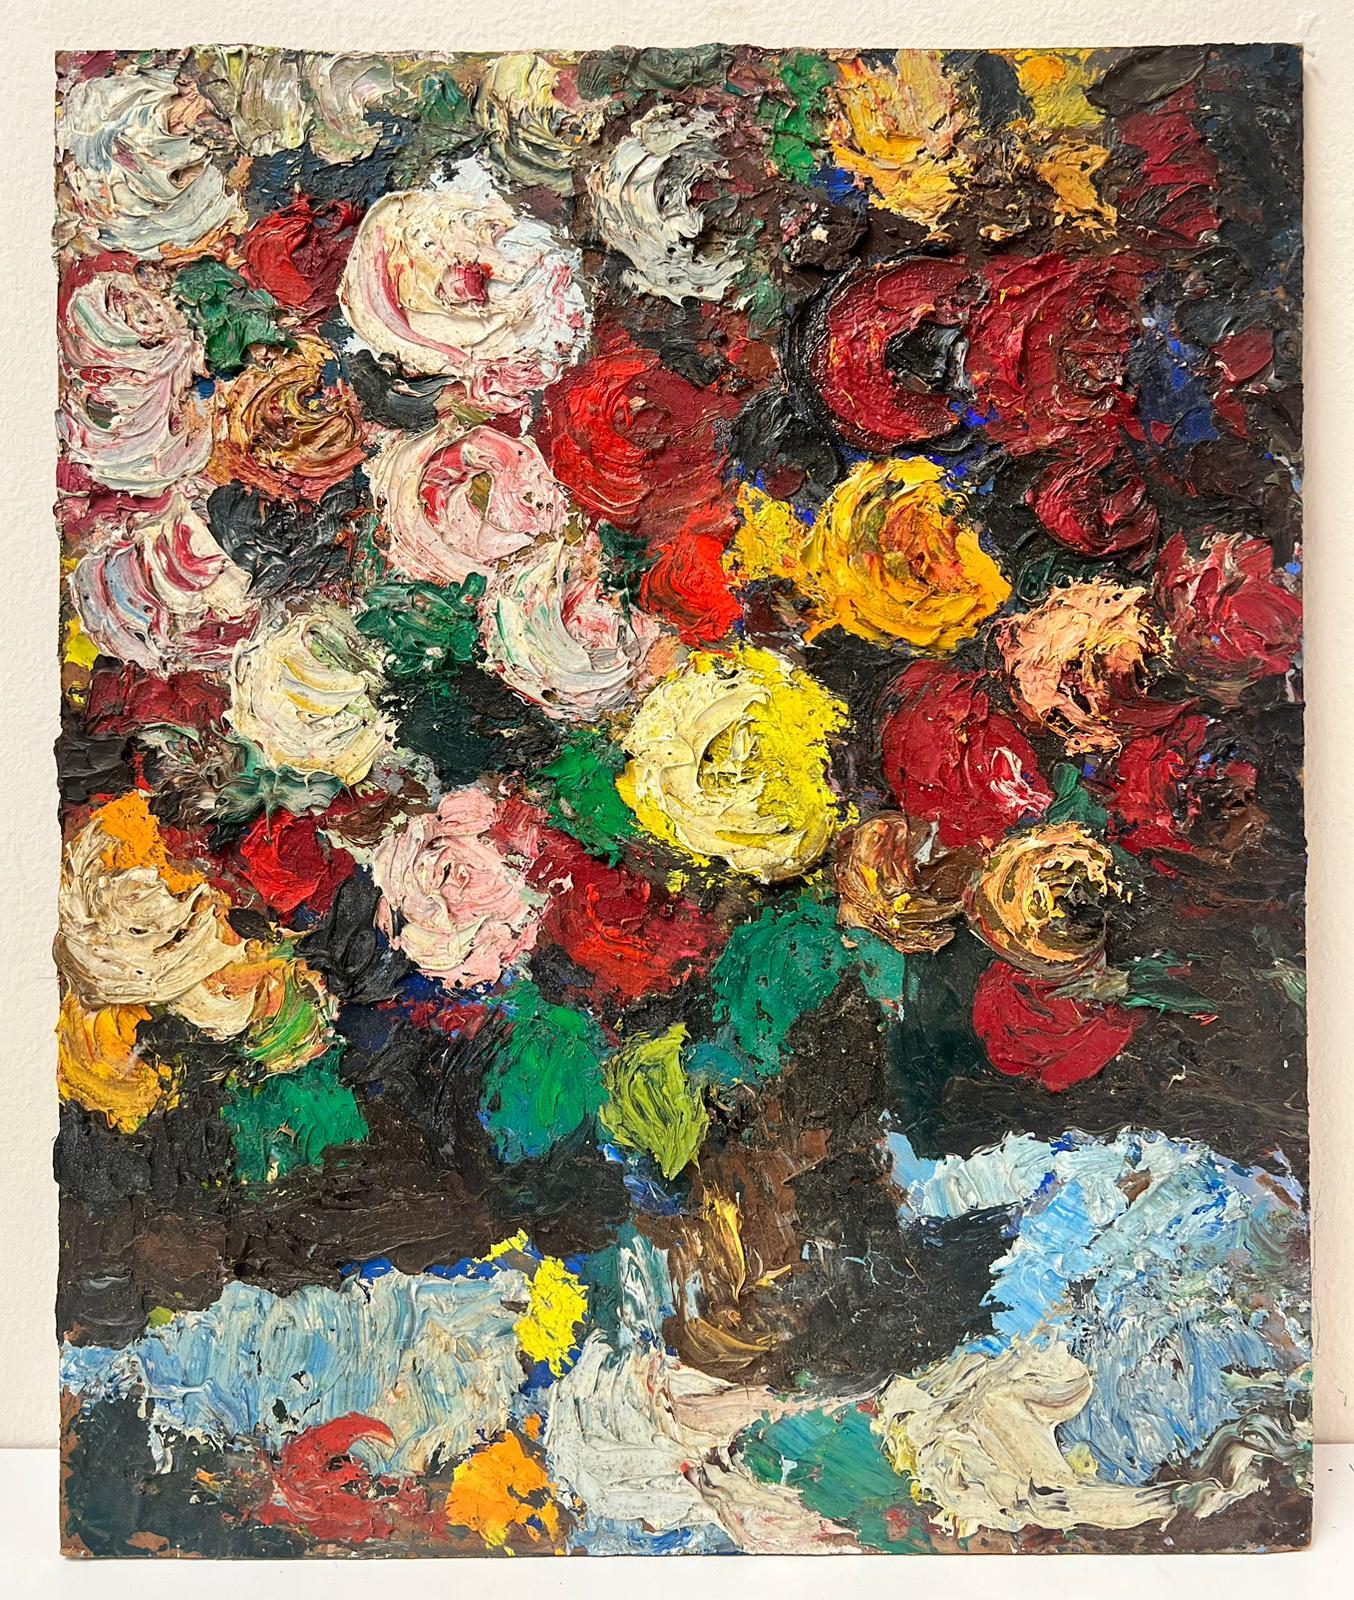 Flowers in Vase
French Expressionist painter, circa 1960's
oil painting on board, unframed
board: 16.5 x 13.75 inches
provenance: private collection, Brittany, France
condition: very good and sound condition 
